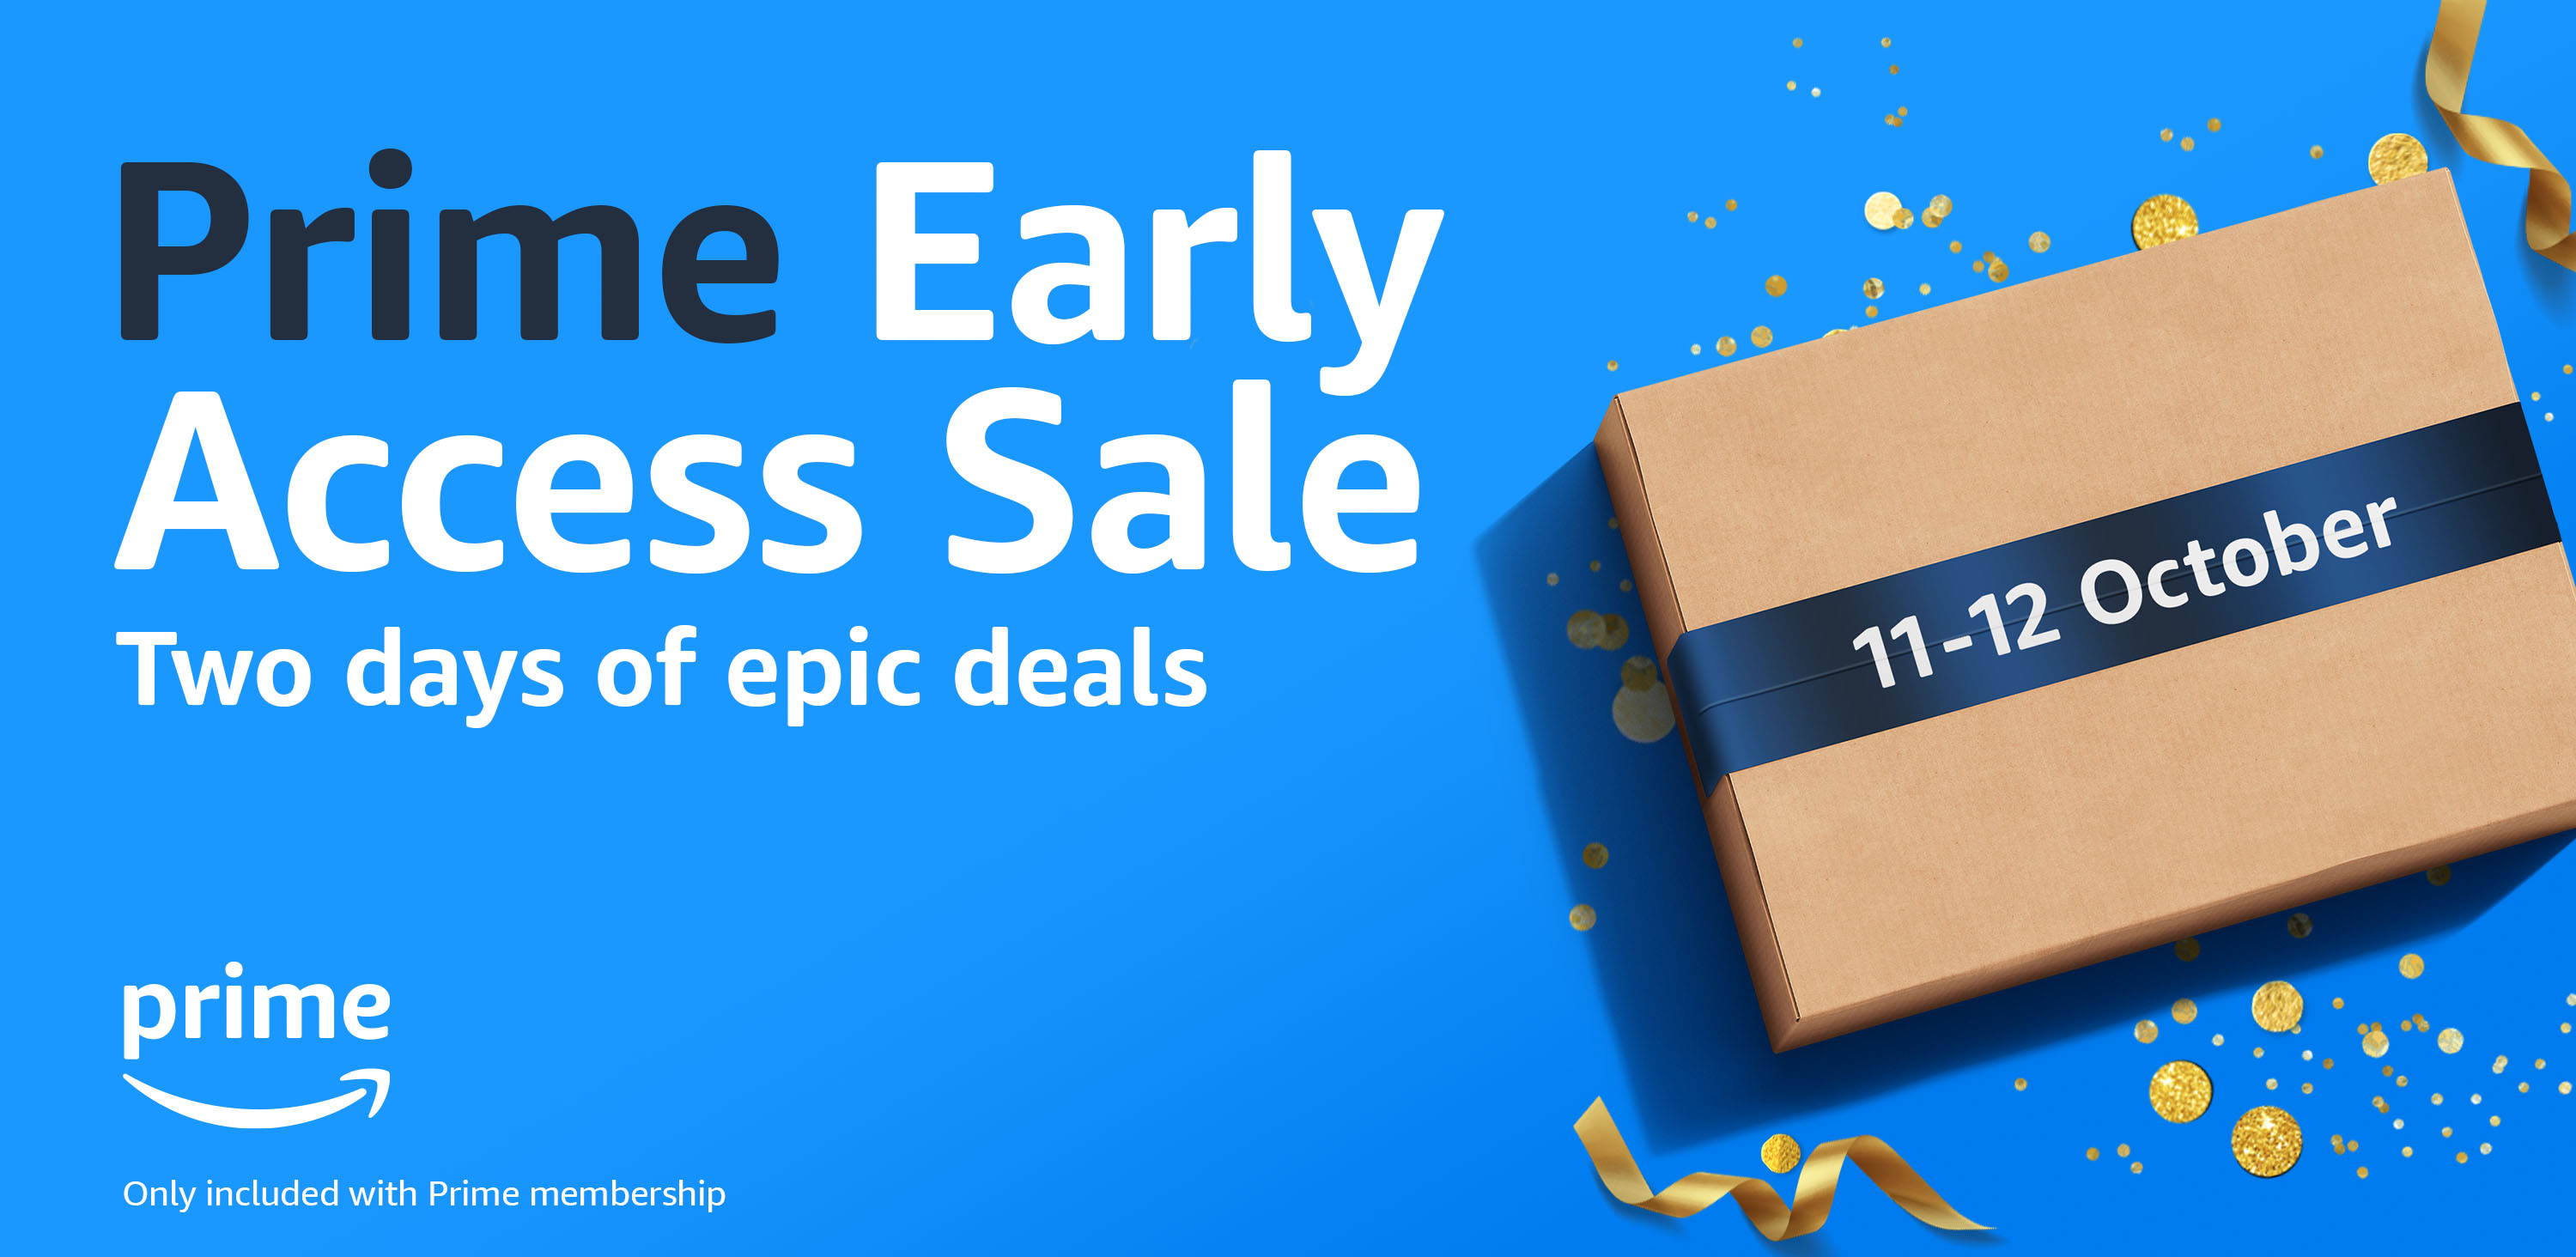 Amazon Prime Early Access Sale header image